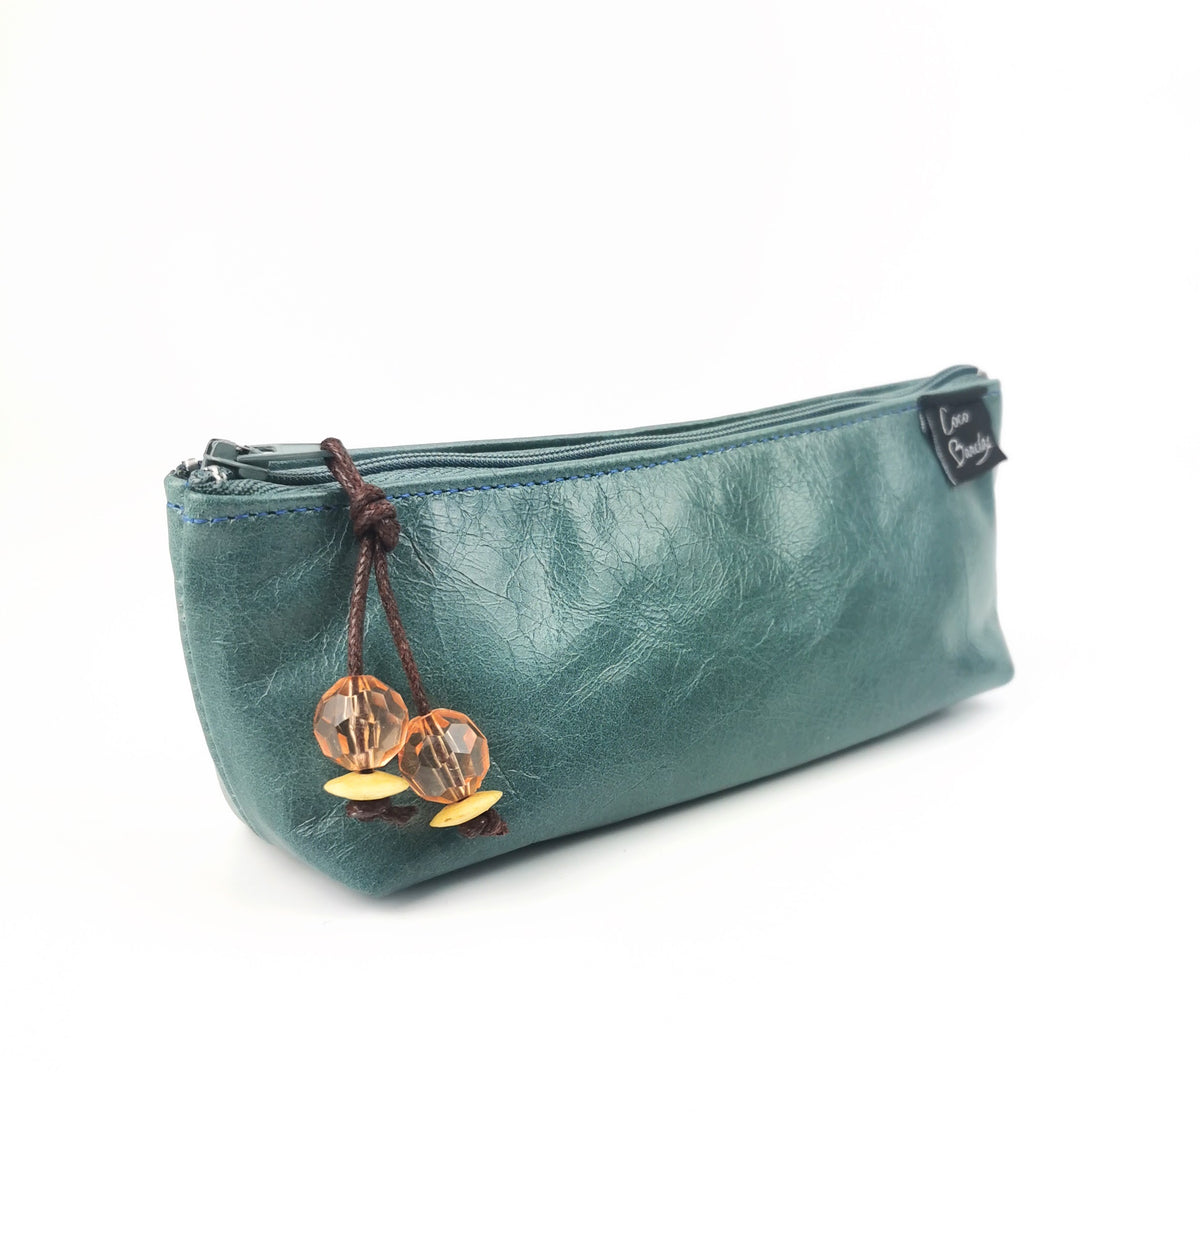 Pencil case in teal leather